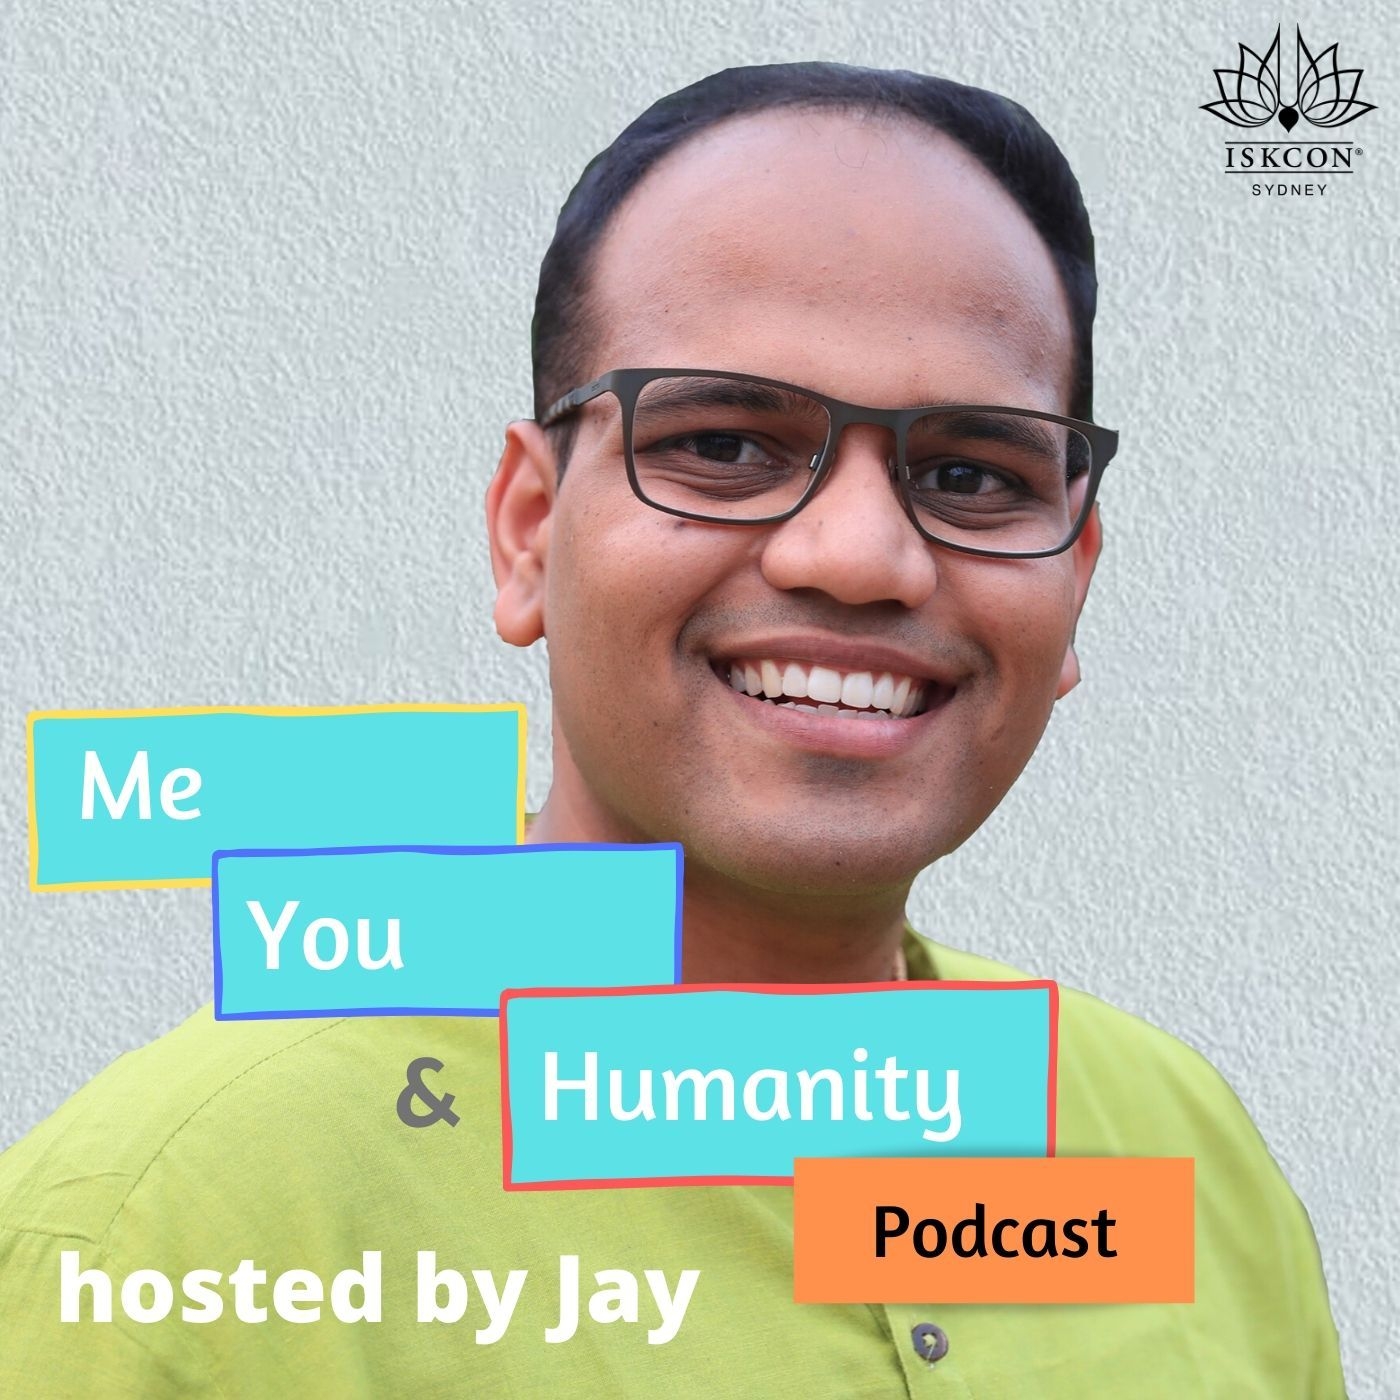 Me, You & Humanity by Jay